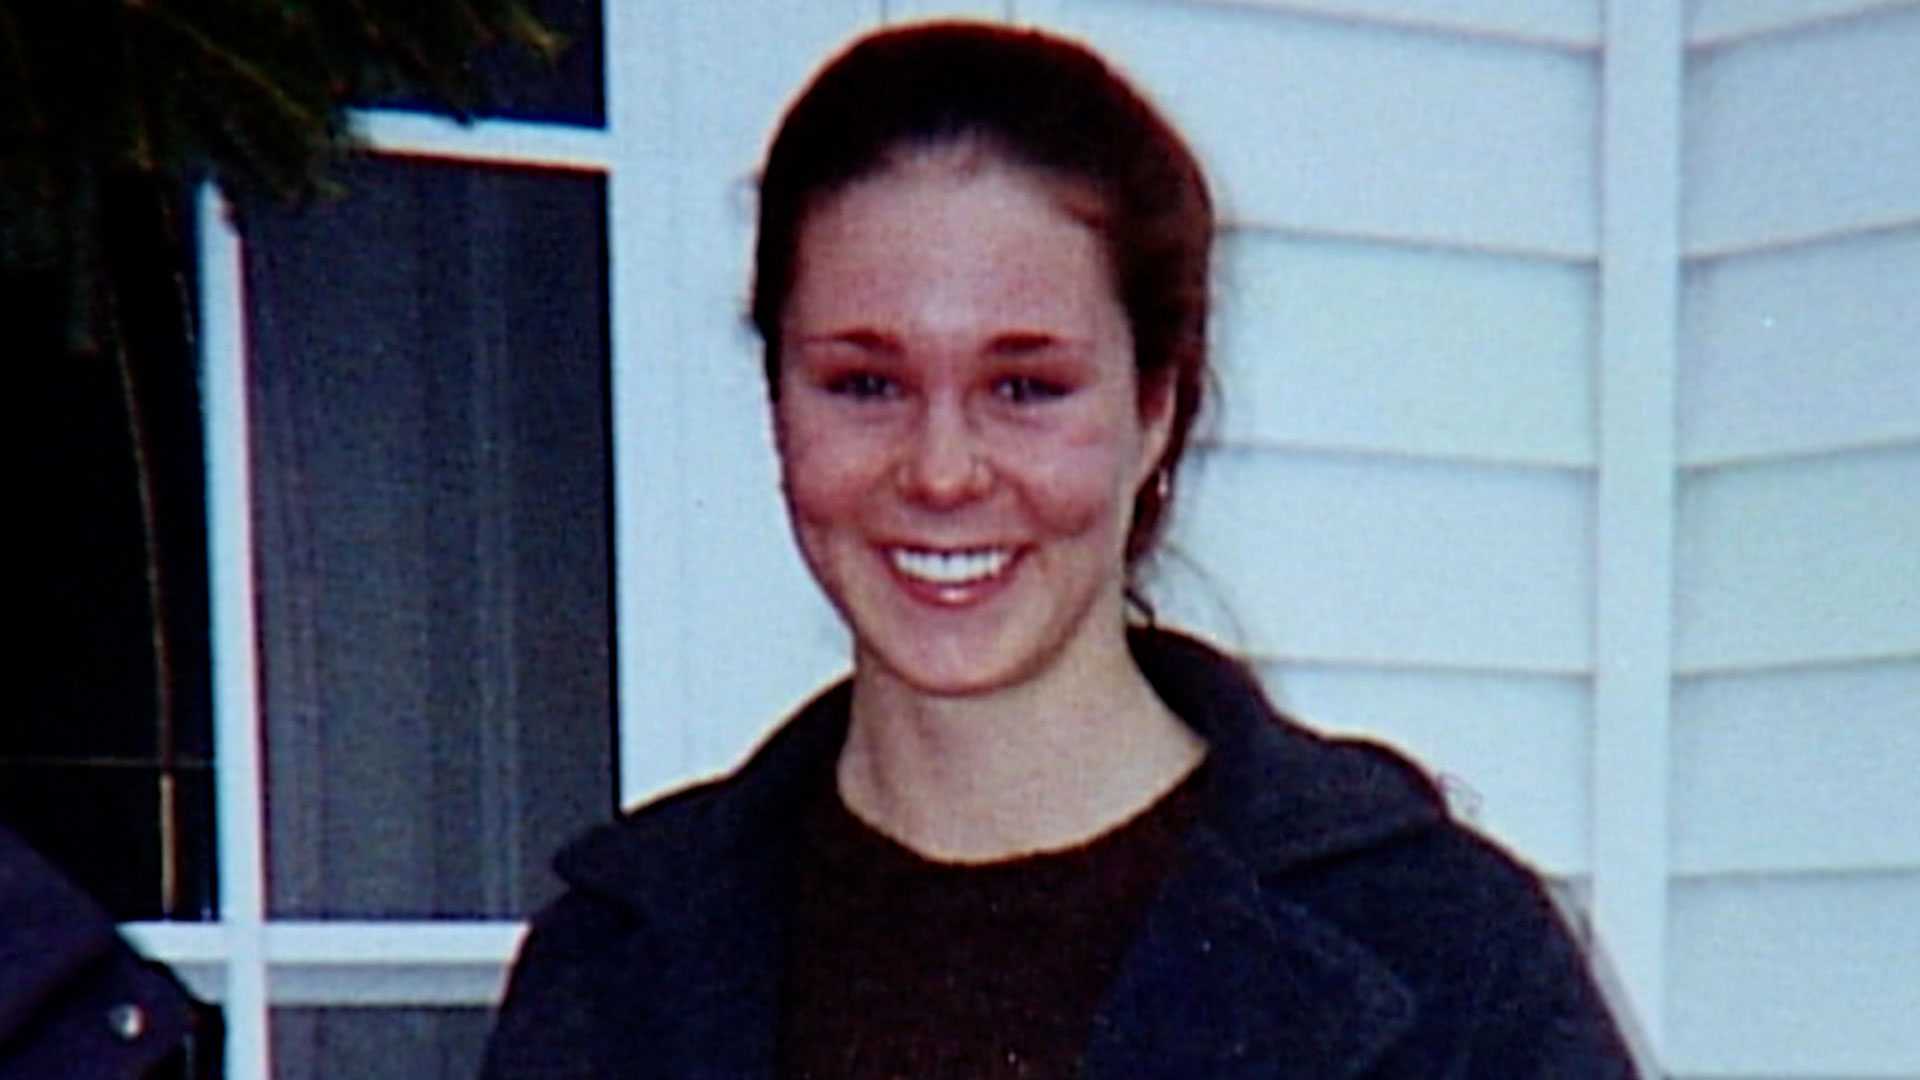 Maura Murray disappeared in 2004. The FBI has issued a new national